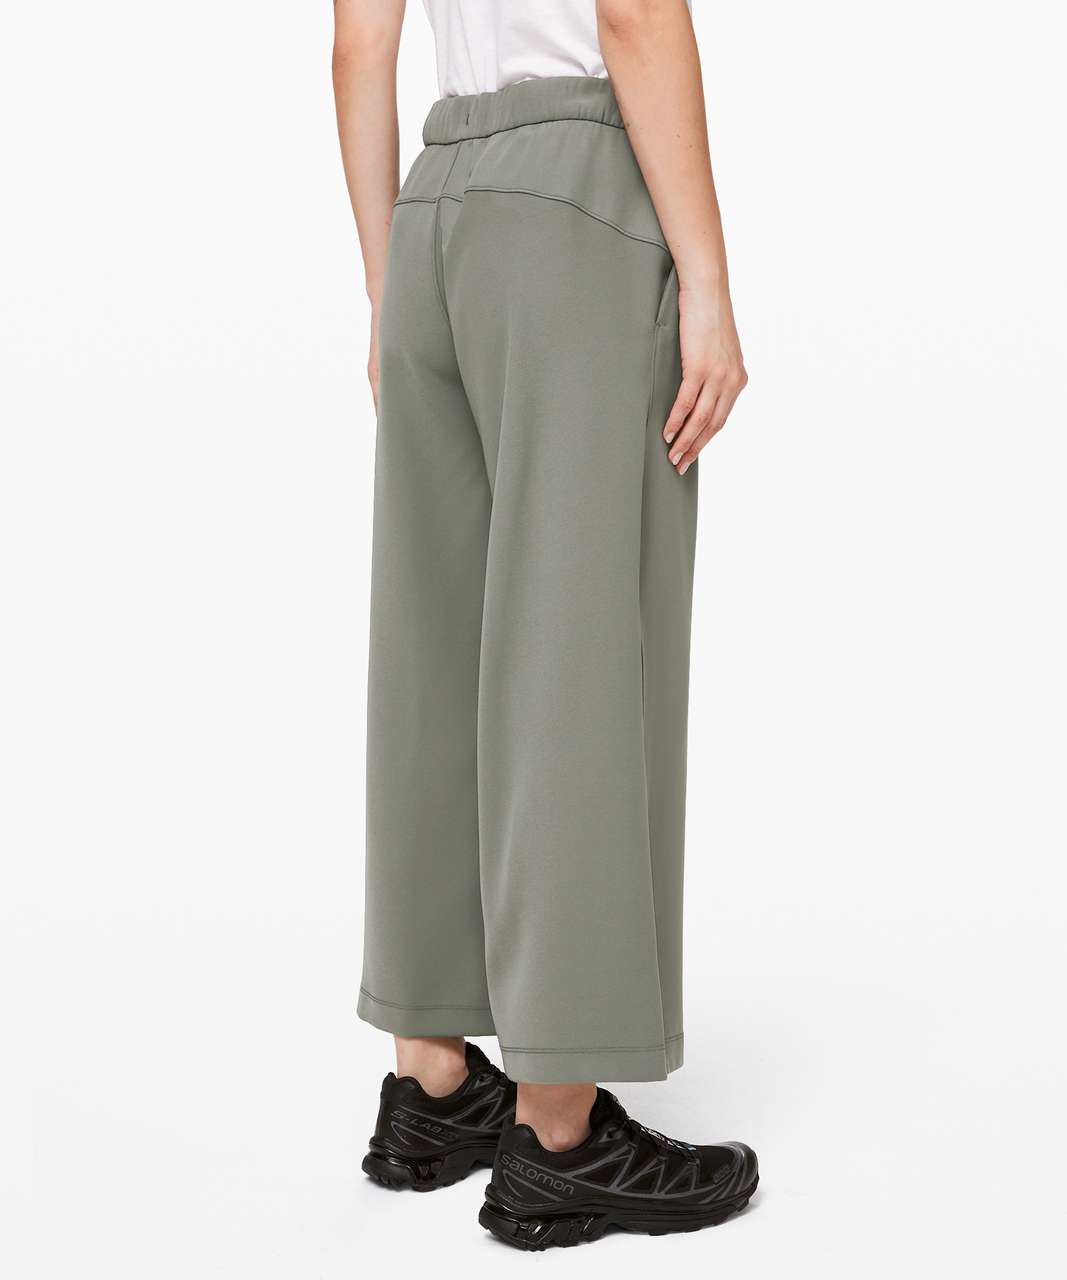 Lululemon Wide Leg On The Fly Pant Size 2 - $73 - From Cara